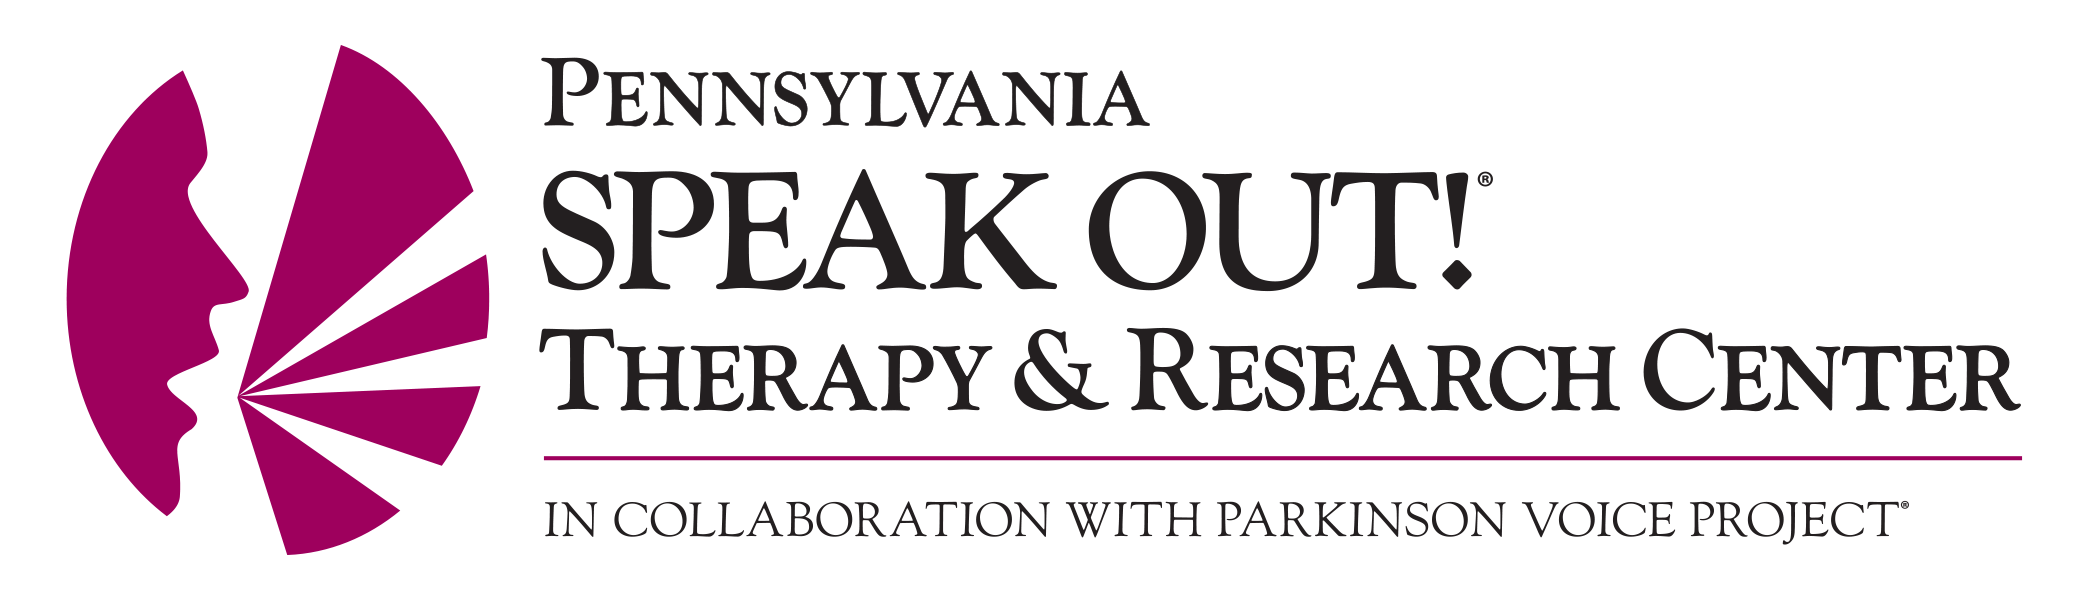 Pennsylvania SPEAK OUT! Therapy and Research Center, in collaboration with Parkinson Voice Project